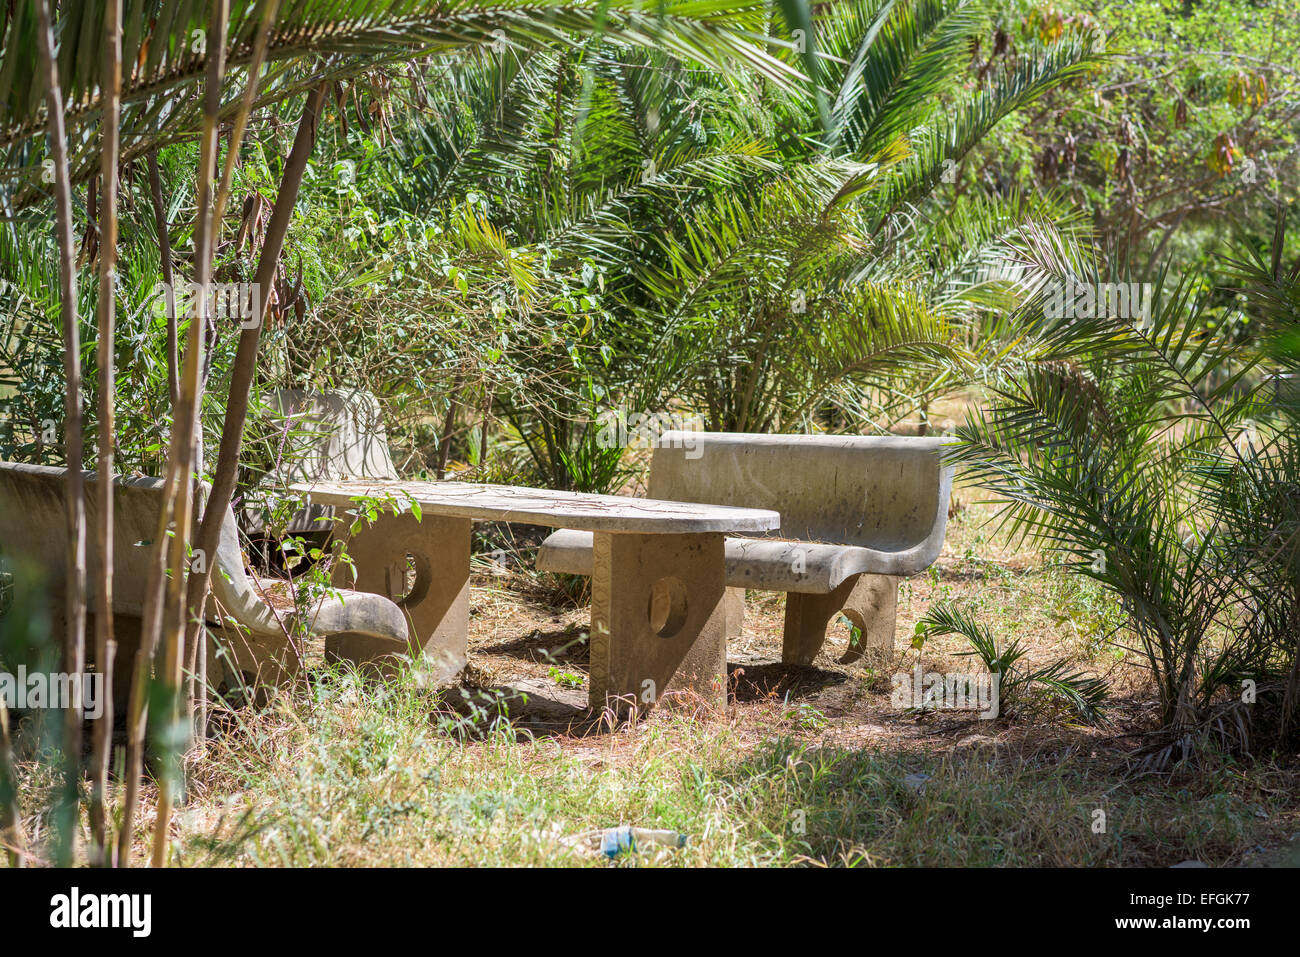 Deserted table under palm trees Stock Photo